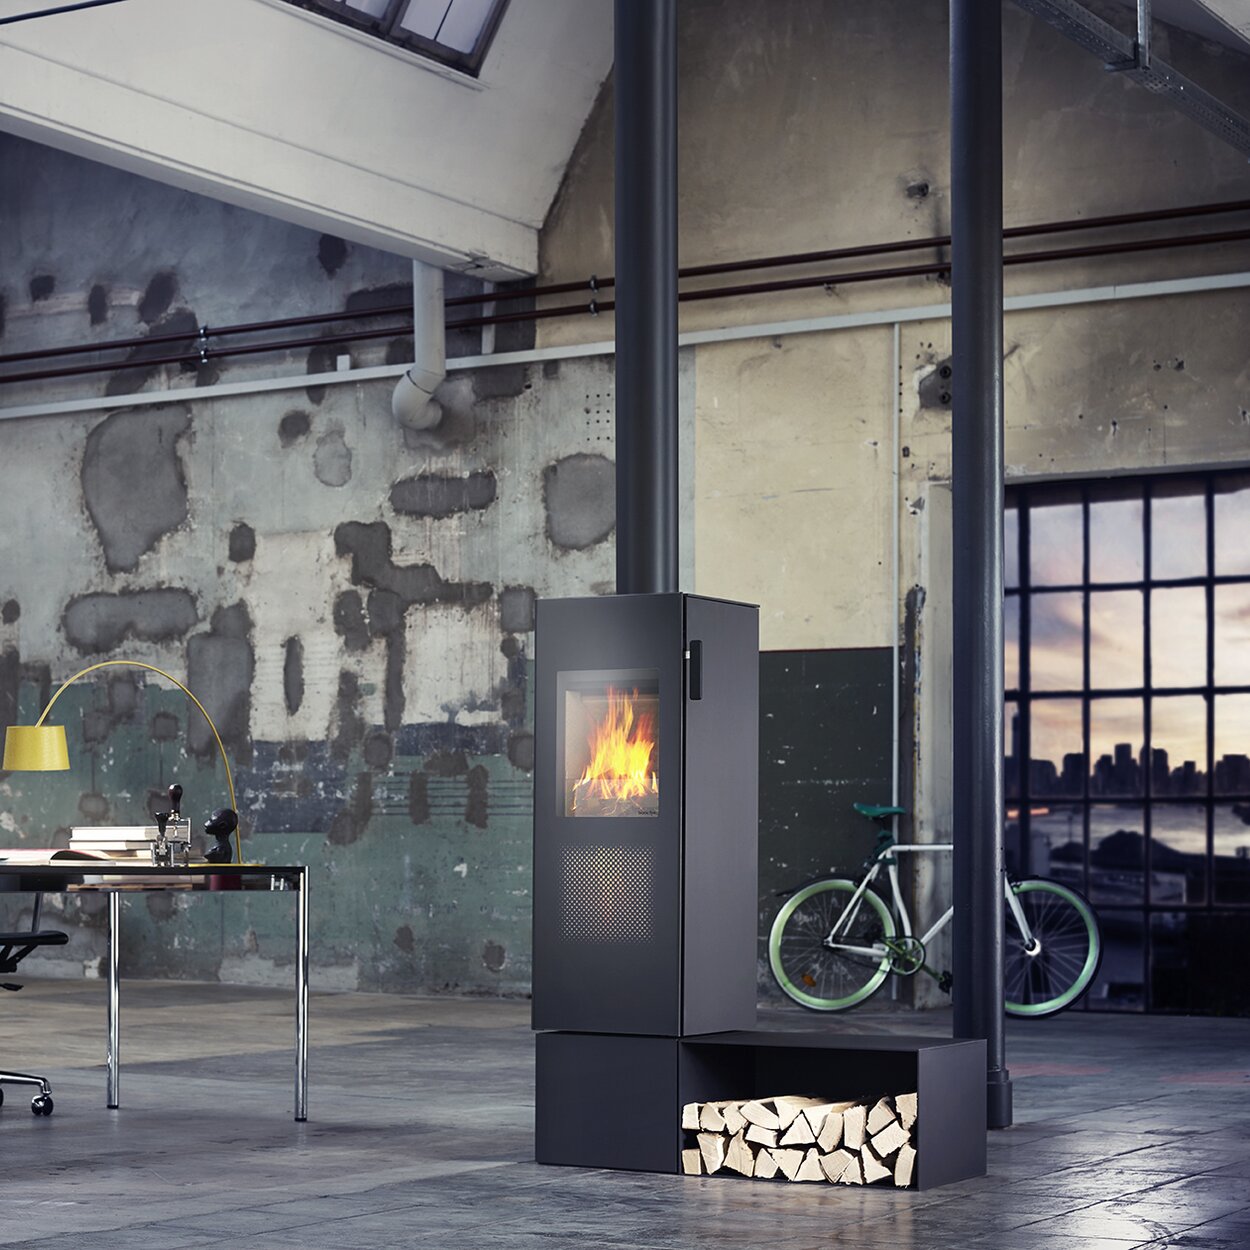 Two flames are created in the bionic fire STUDIO firebox, one upwards and one downwards